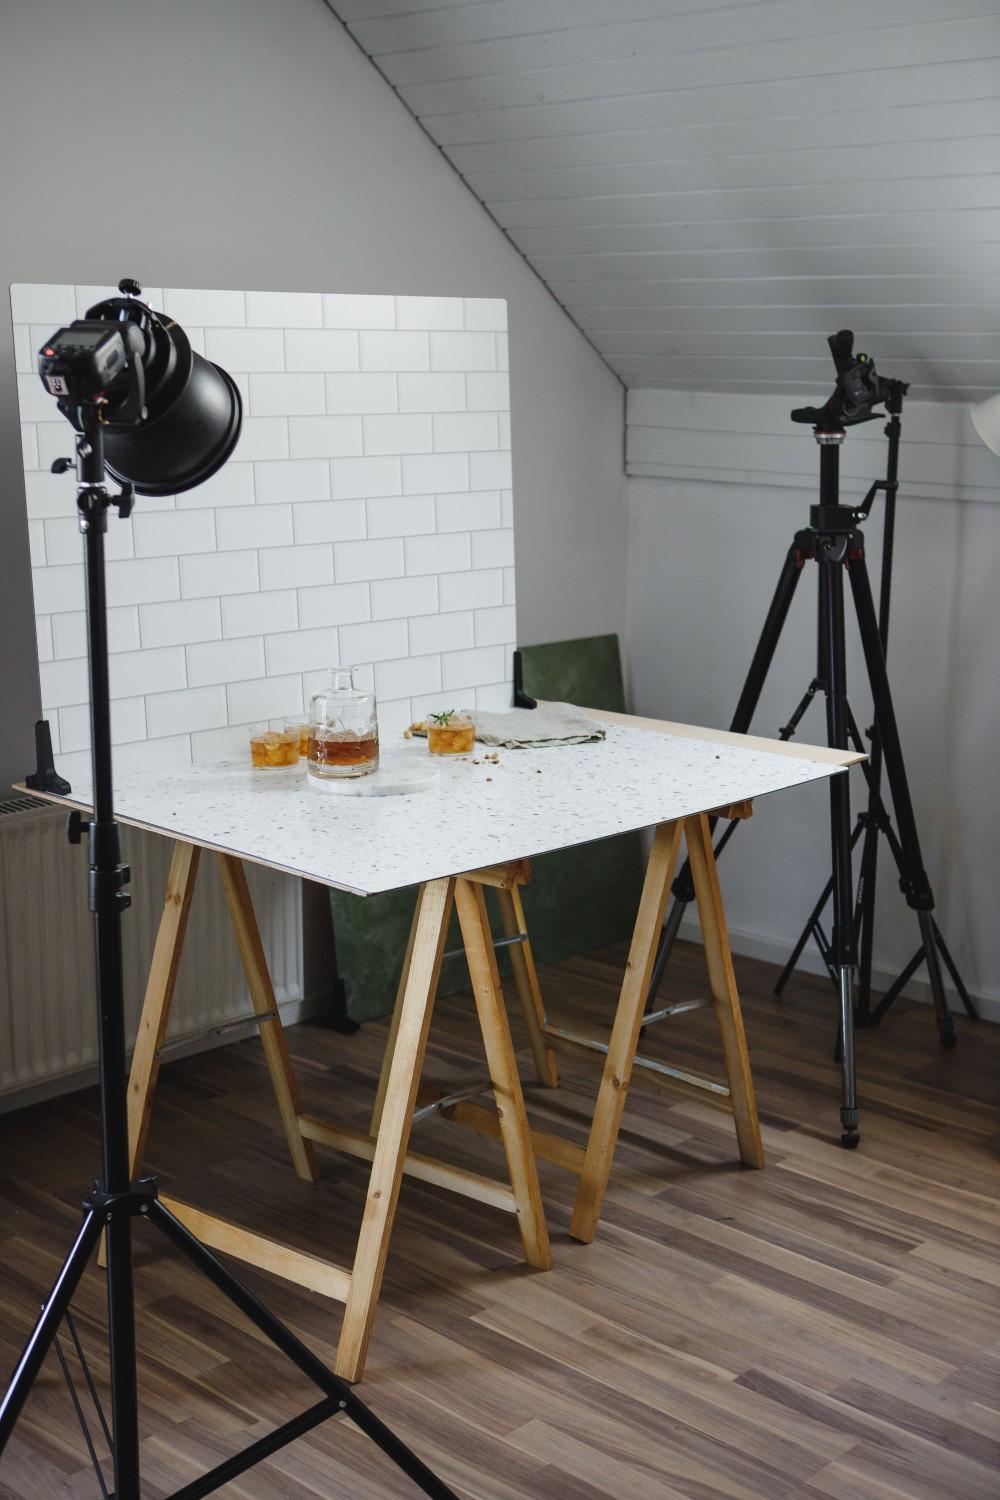 Curious about photography backdrops and how to mix them in your food photography work? There are a number of ways you can mix and match backdrops and I hope my ideas will give you a creative boost for your work!